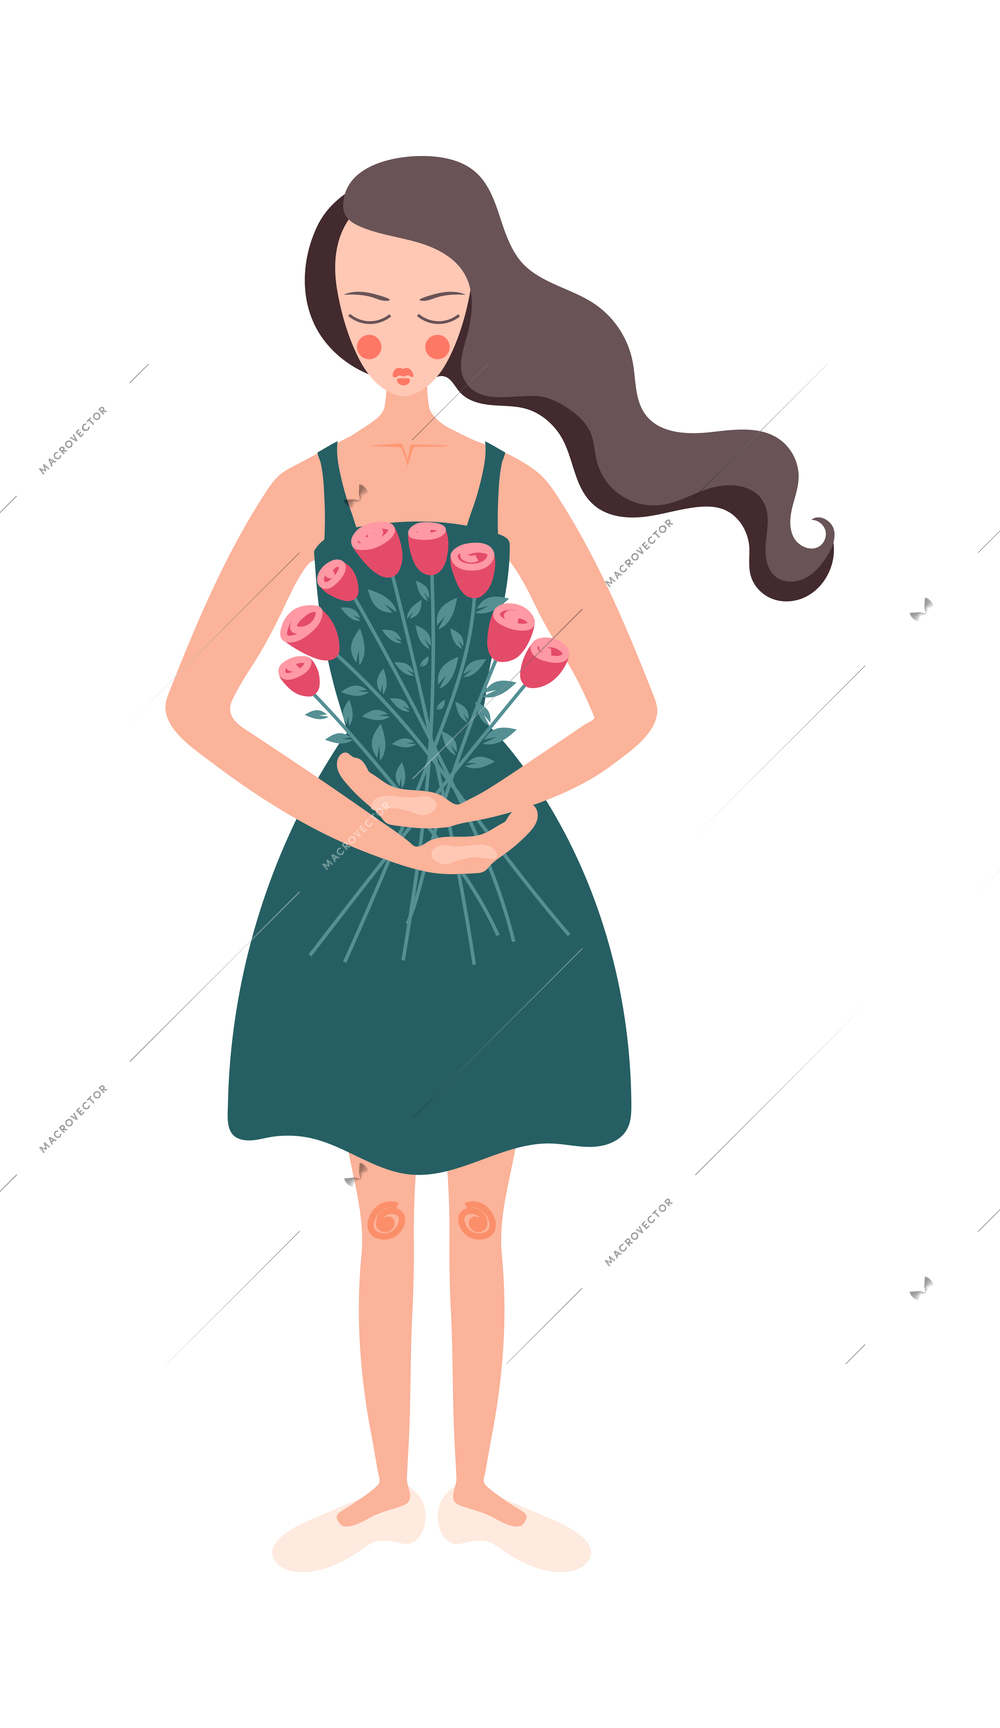 Flower girls flat composition with character of women with loose hair holding bunch of flowers vector illustration